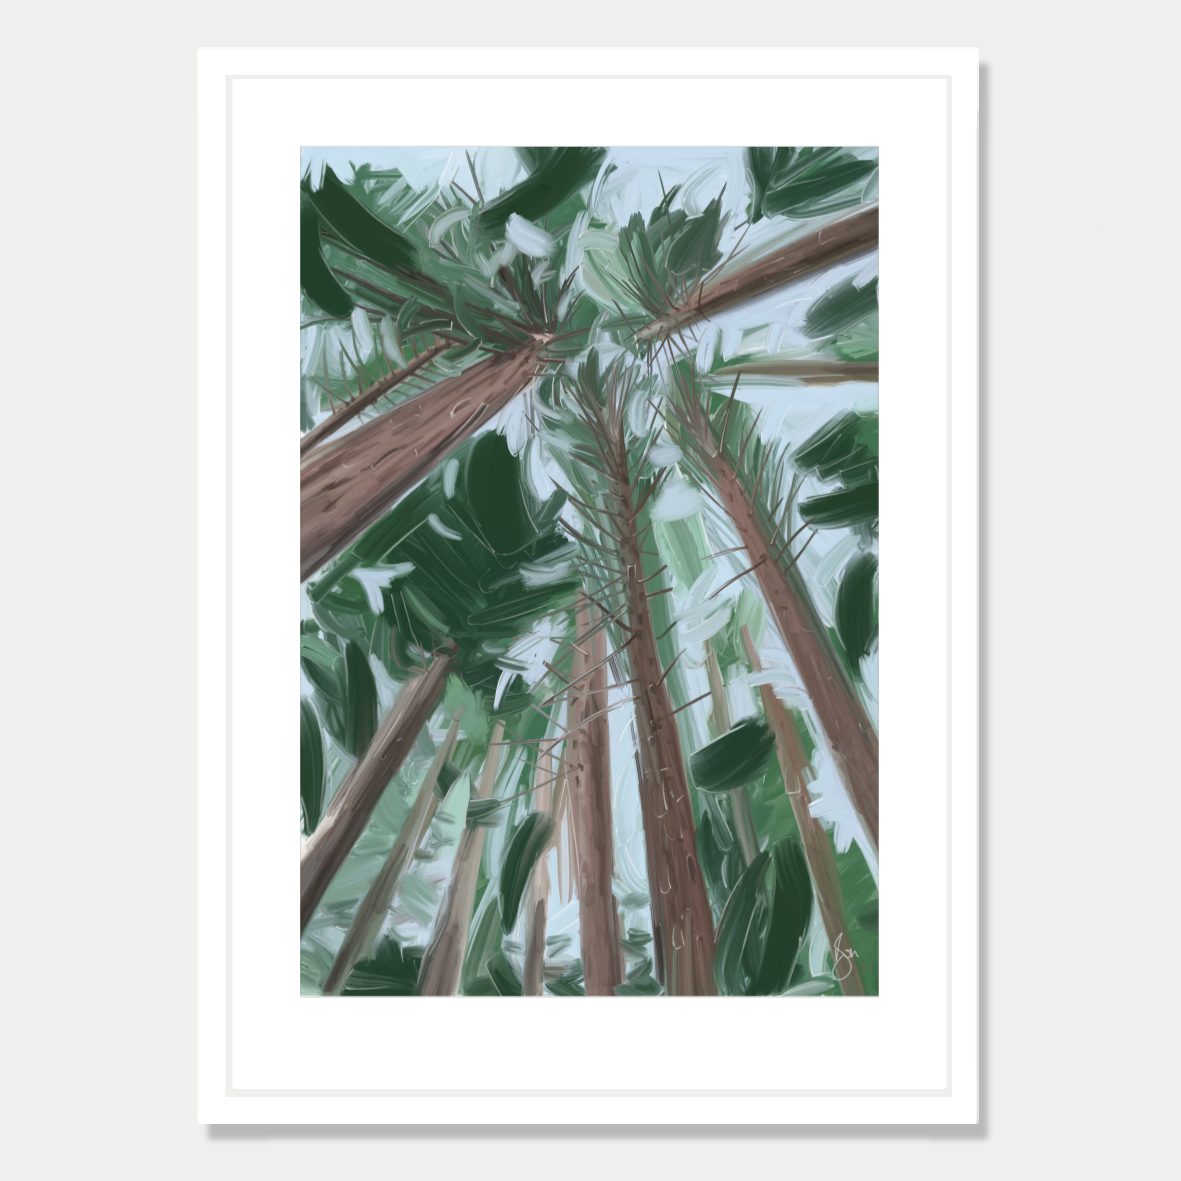 This art print is a still life of a forest scene in New Zealand, by Bon Jung. Printed in New Zealand by endemicworld and framed in white.